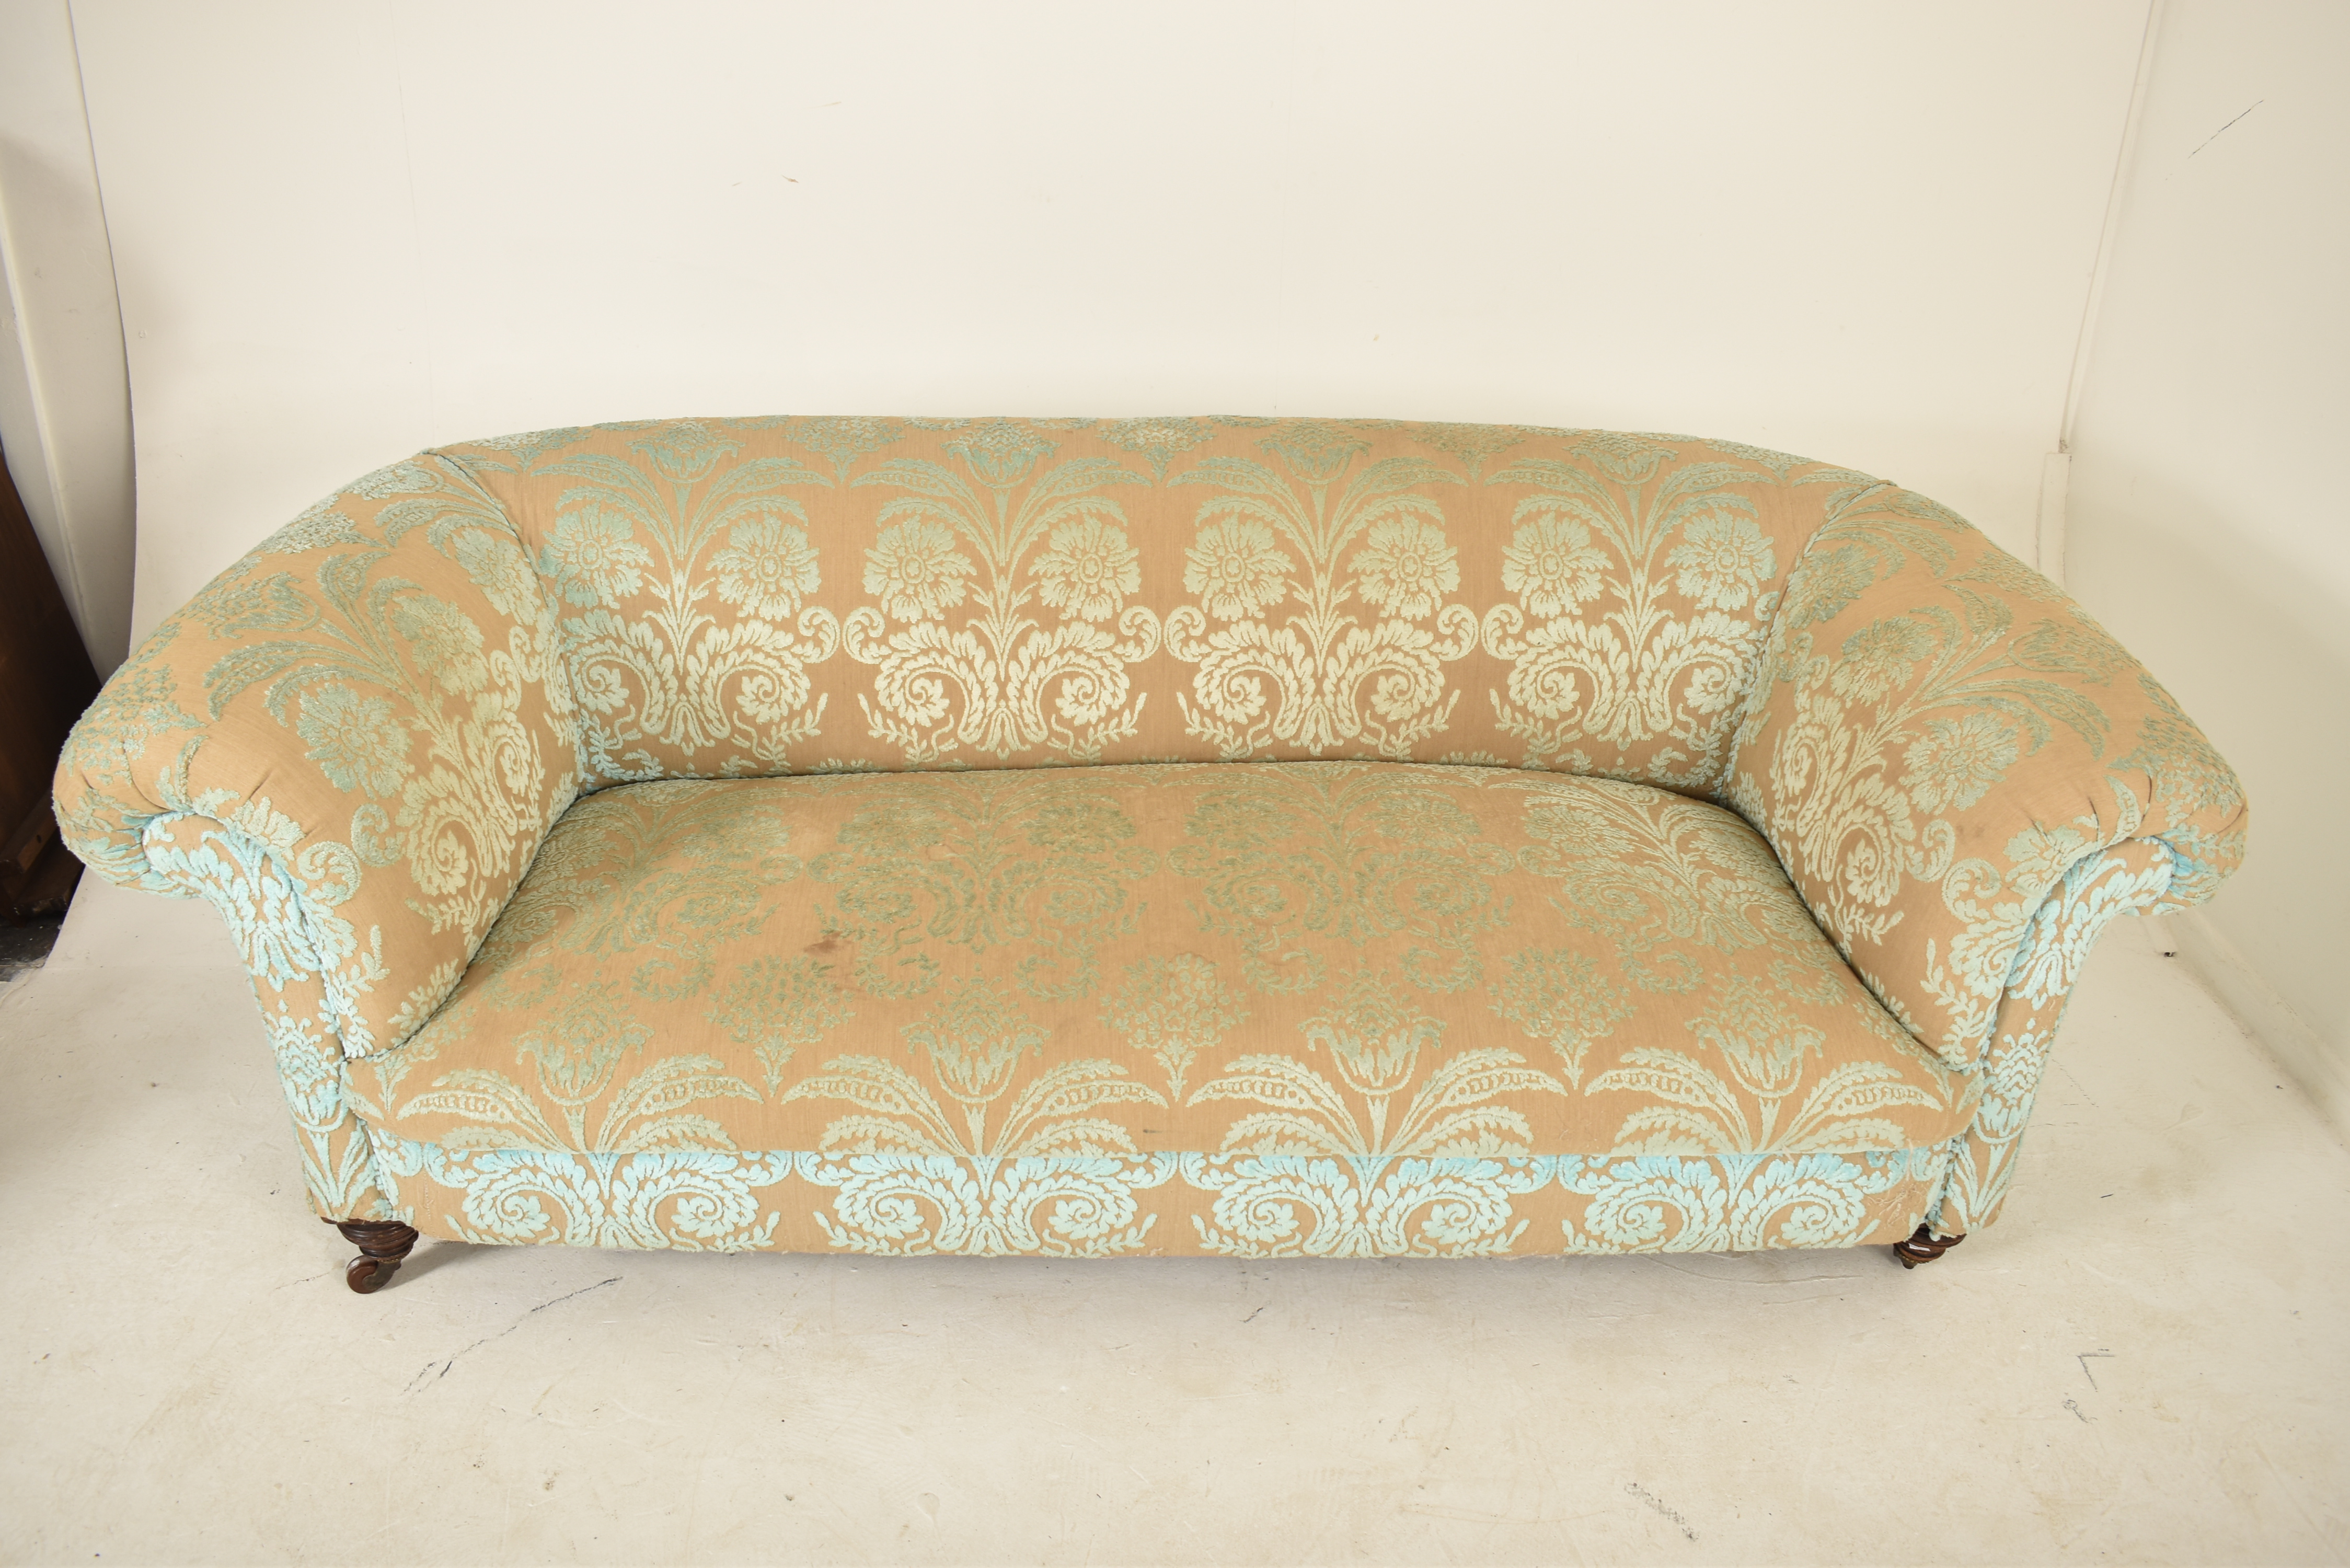 TWO 19TH CENTURY VICTORIAN LARGE CHESTERFIELD SOFAS - Image 7 of 10